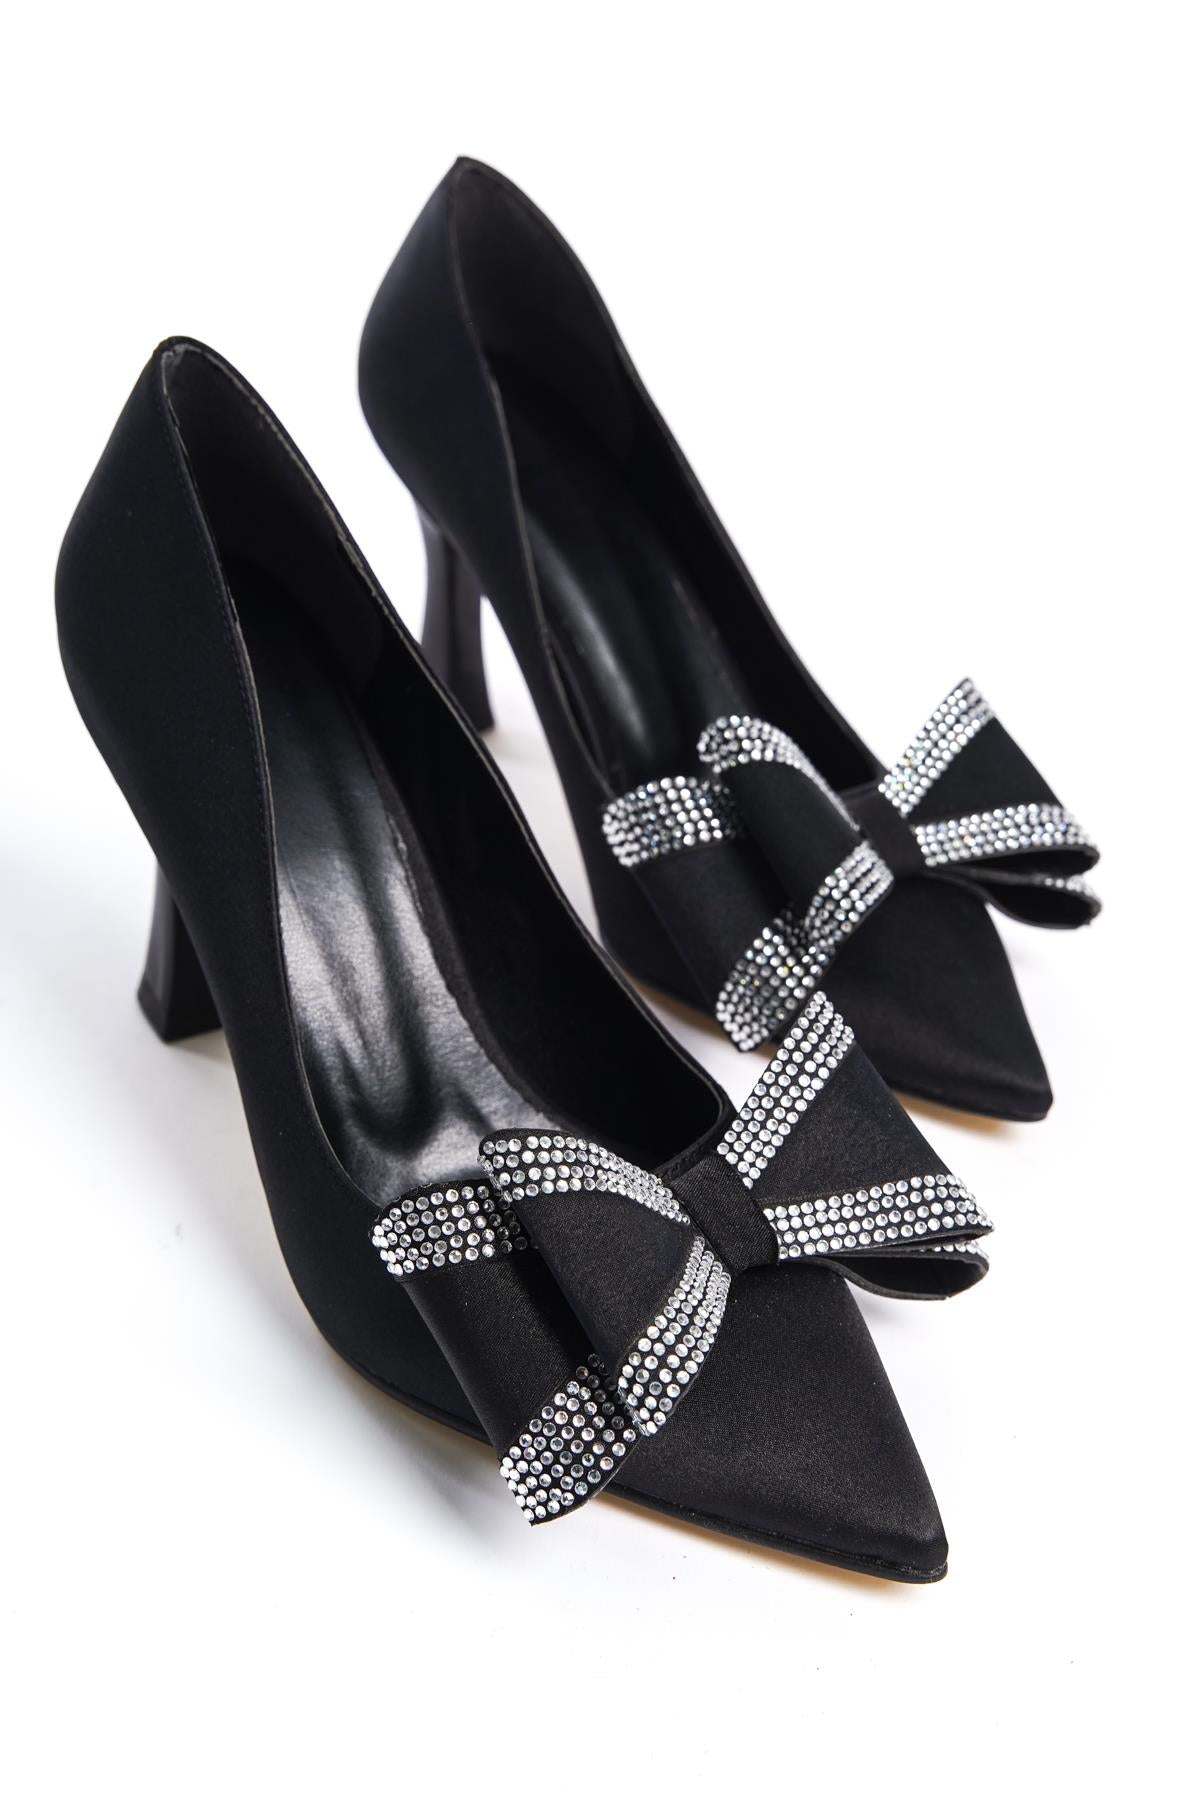 Women's Black Fasm Satin Painted Heel Bow Detailed Evening Shoes - STREETMODE™